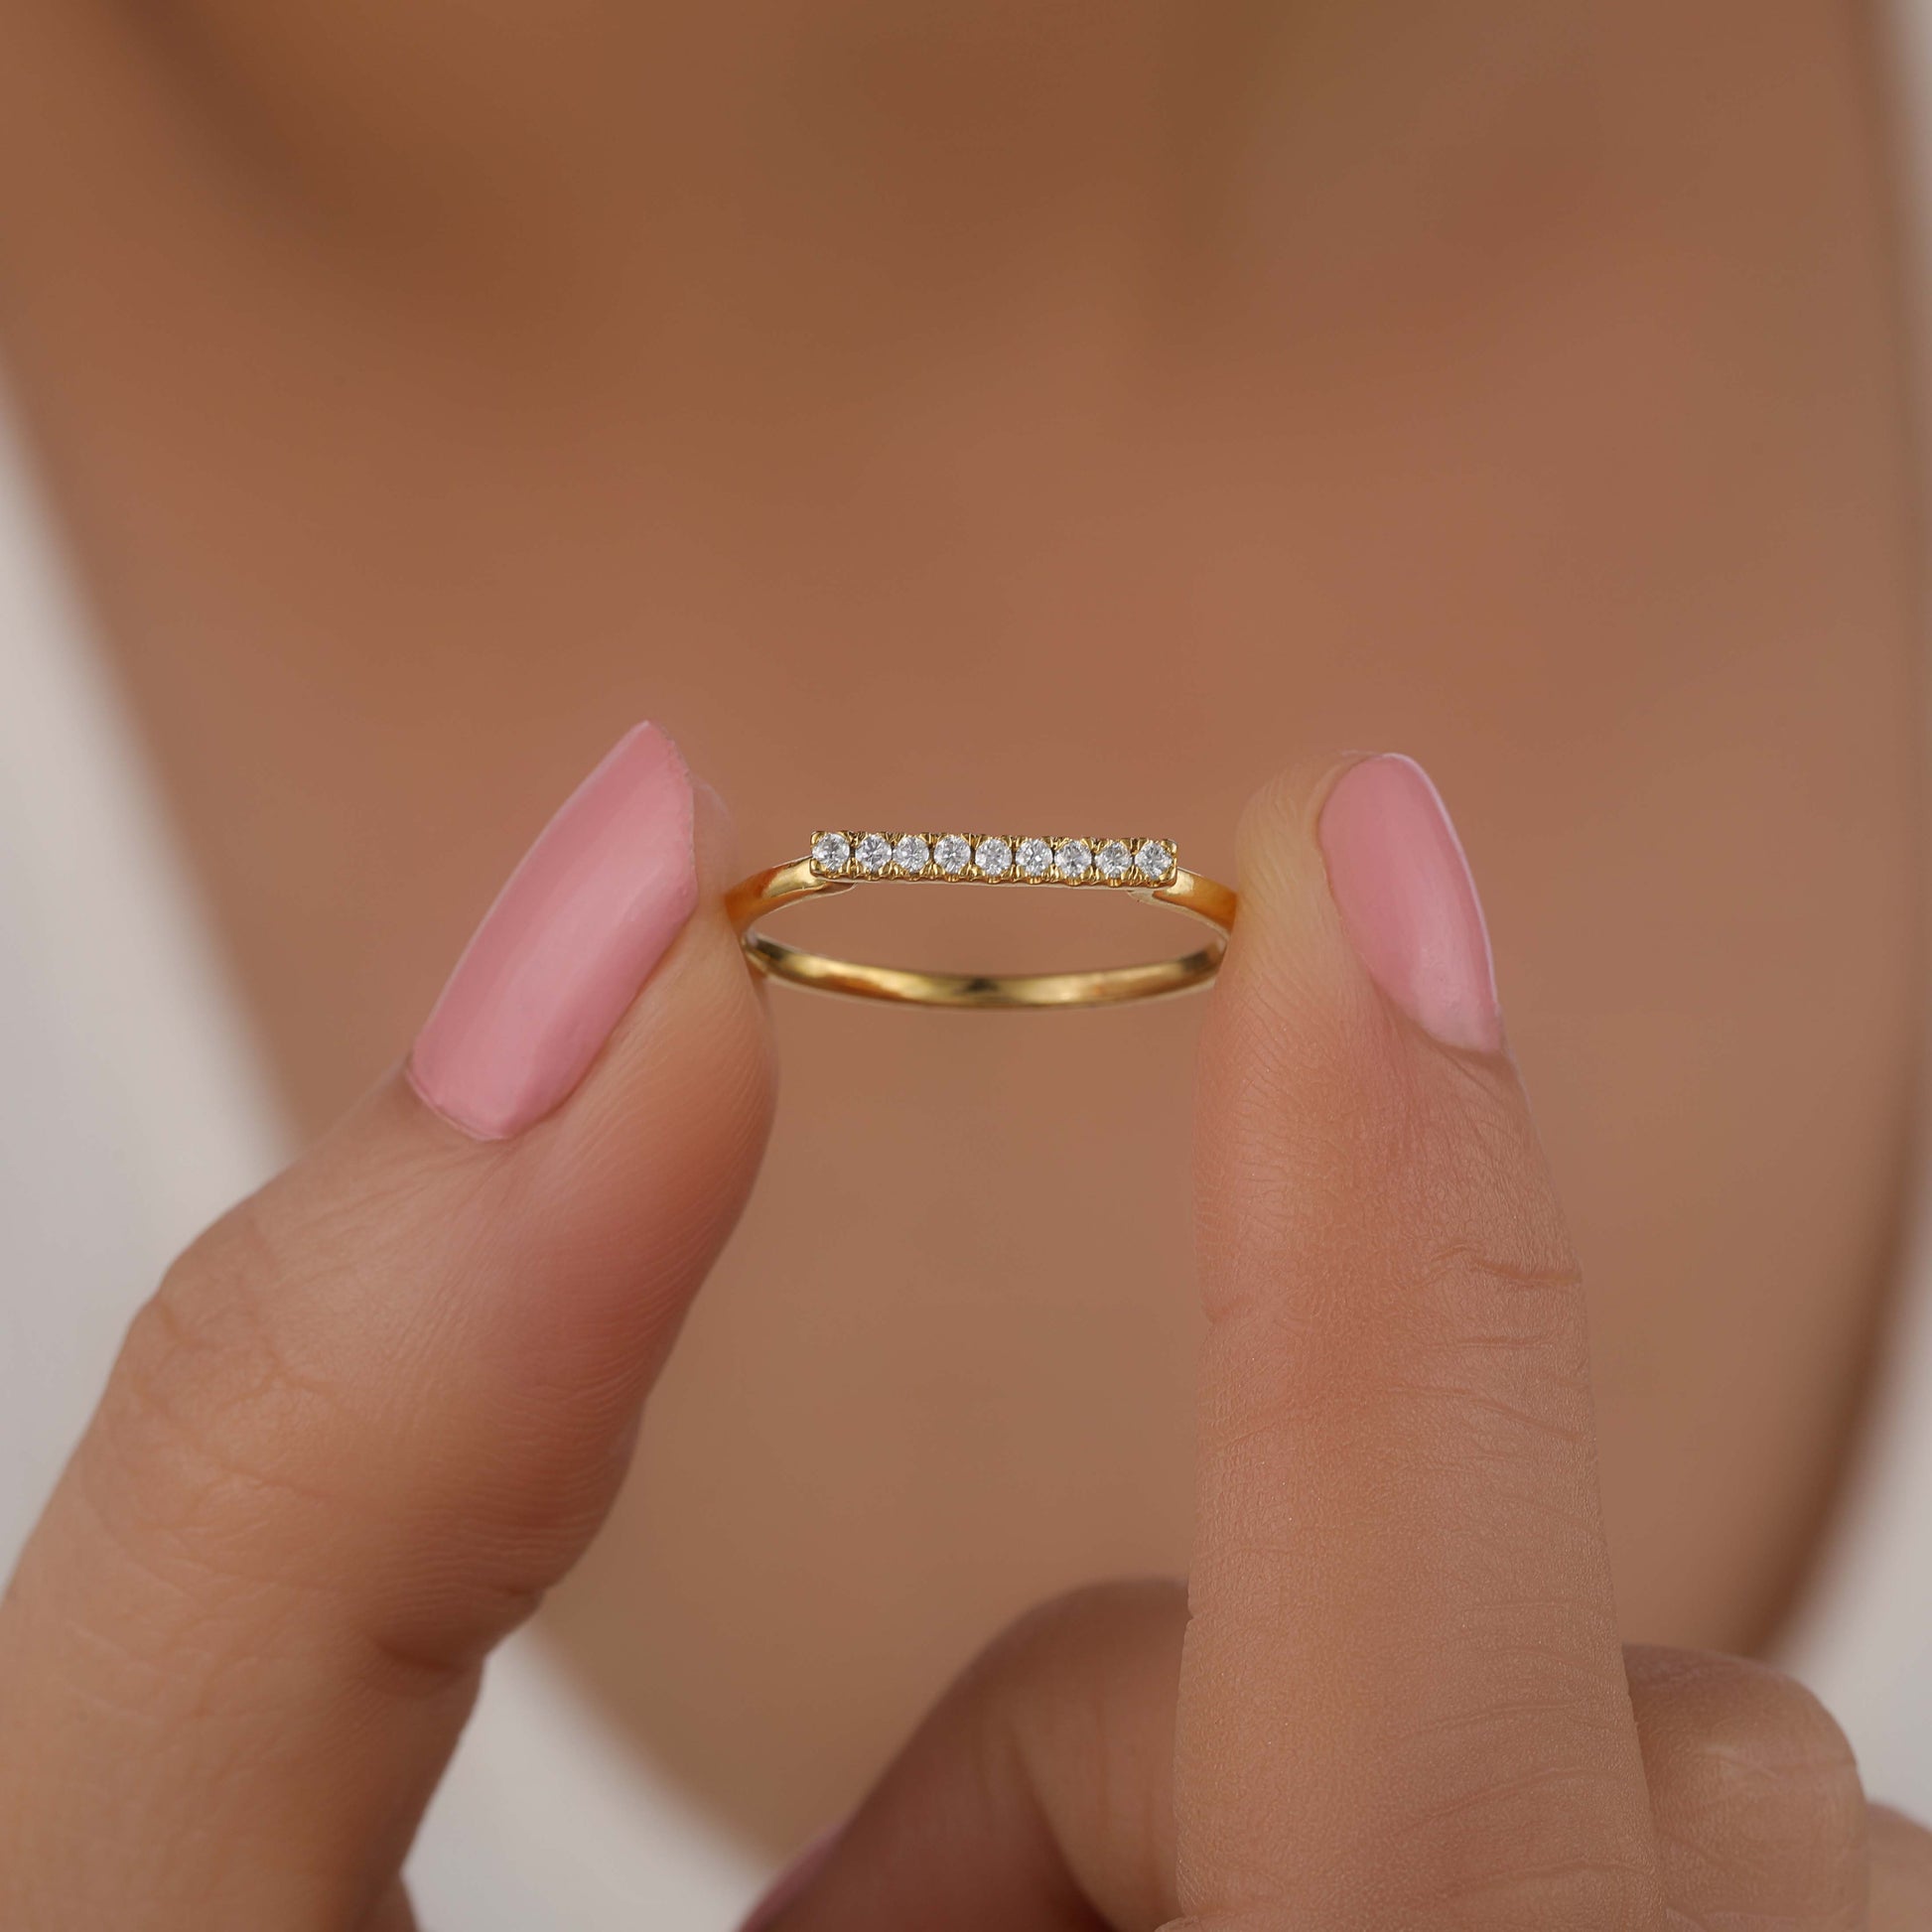 Stackable wedding ring on Model hand